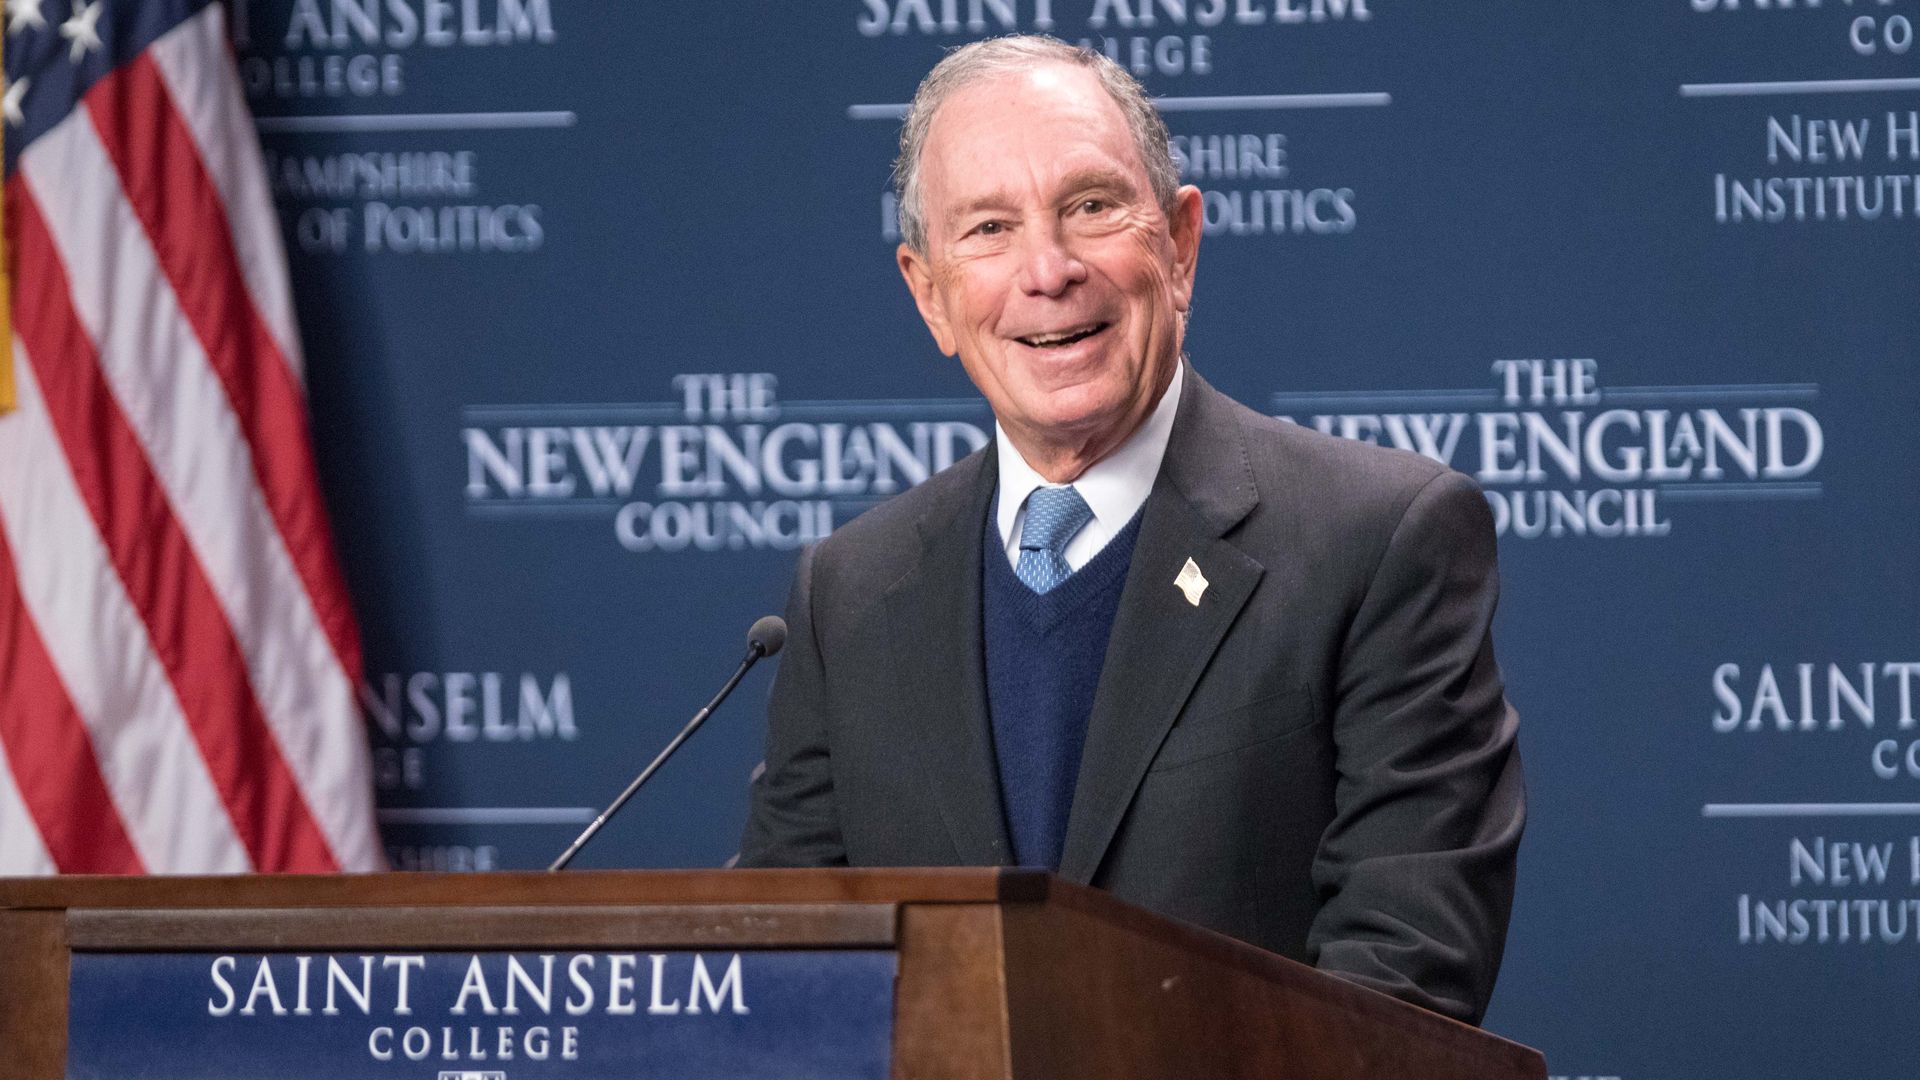 Former New York City Mayor Michael Bloomberg speaks about the climate at the New Hampshire Institute of Politics on January 29, 2019 in Manchester, New Hampshire. 